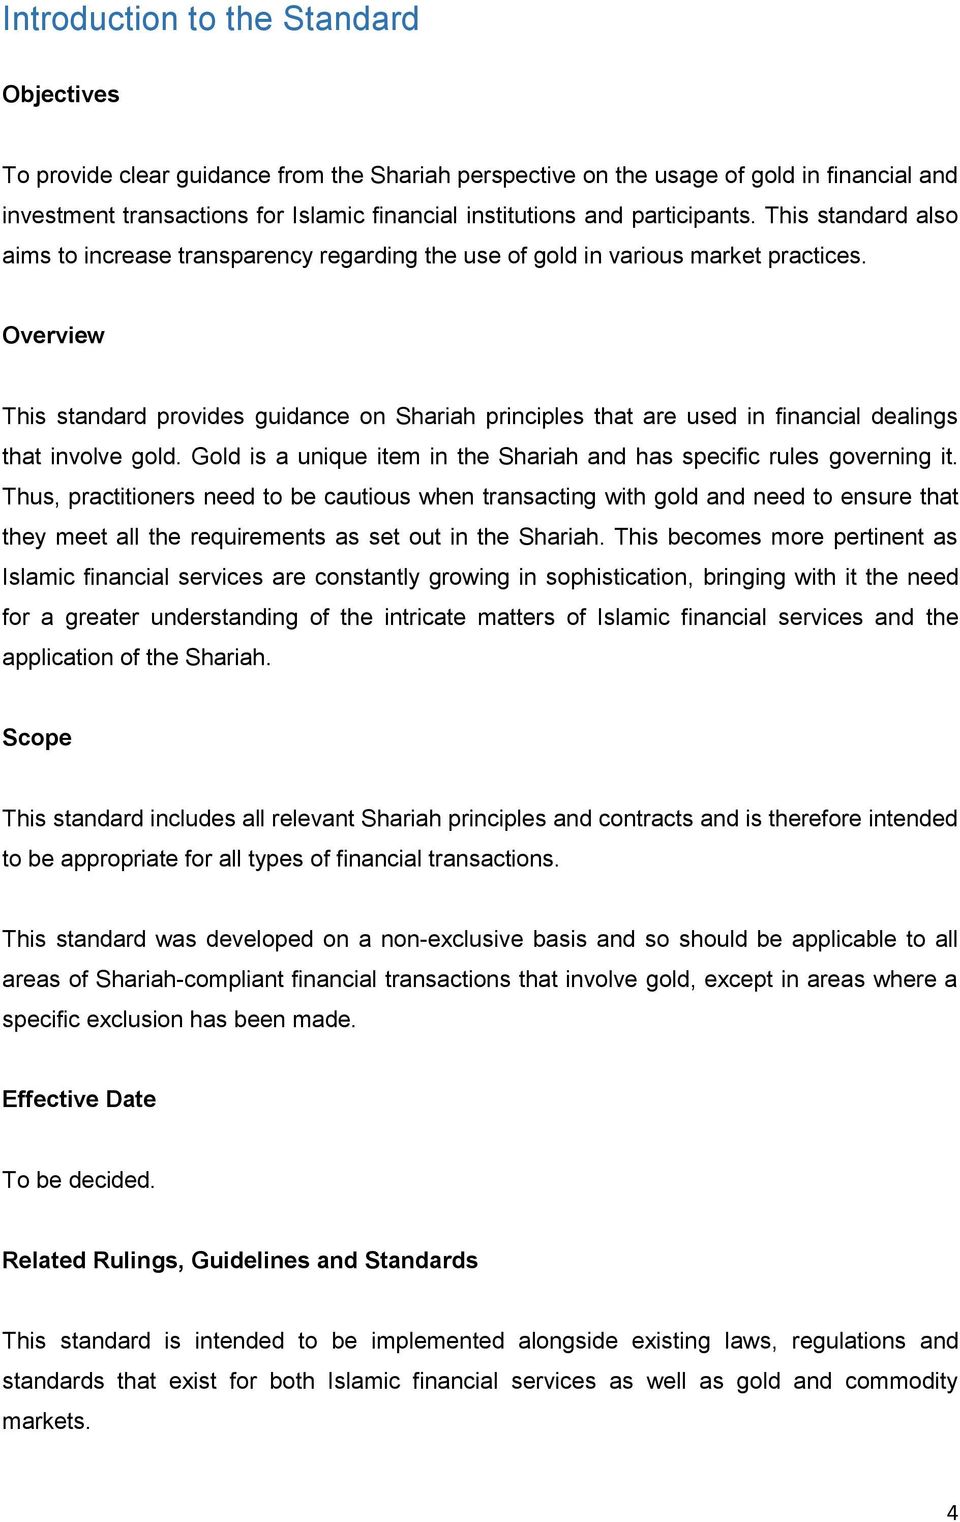 Overview This standard provides guidance on Shariah principles that are used in financial dealings that involve gold. Gold is a unique item in the Shariah and has specific rules governing it.